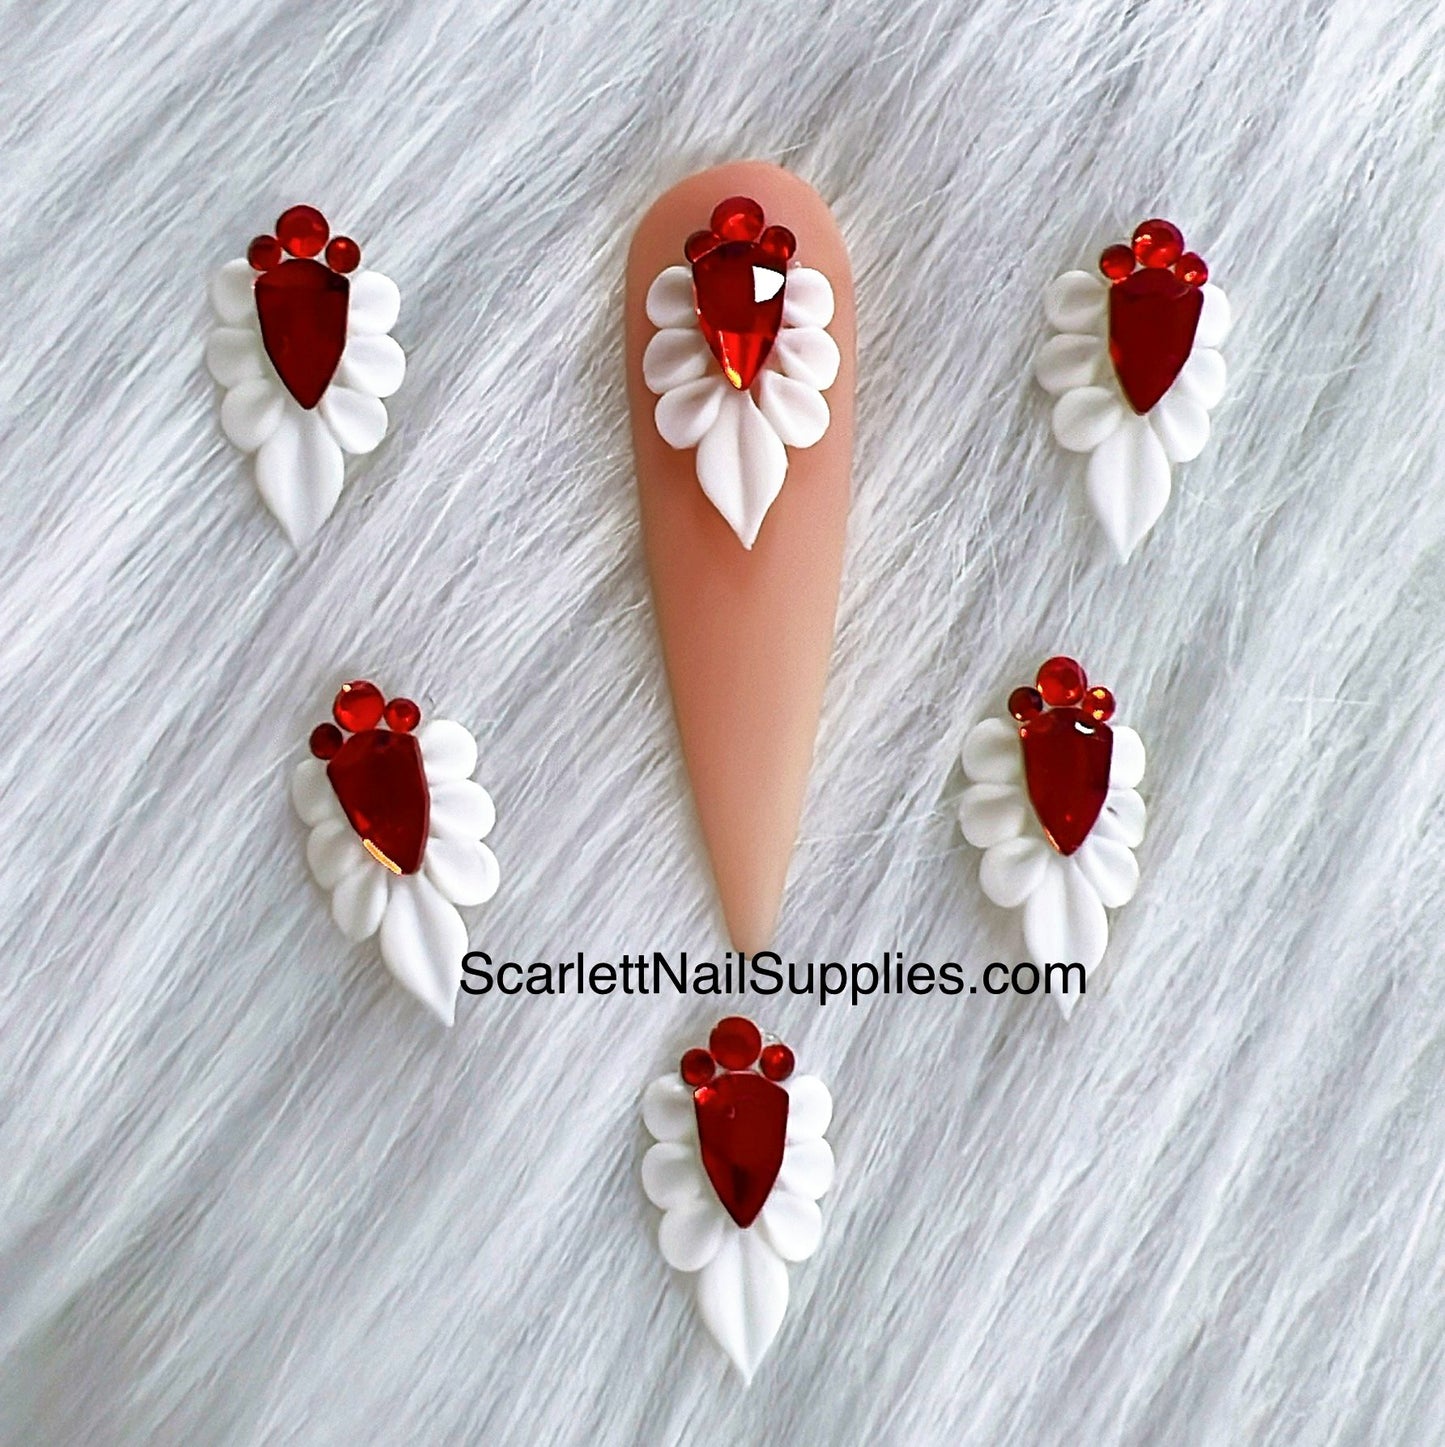 Made of high quality white acrylic nail powder with Red Crystal Rhinestones.